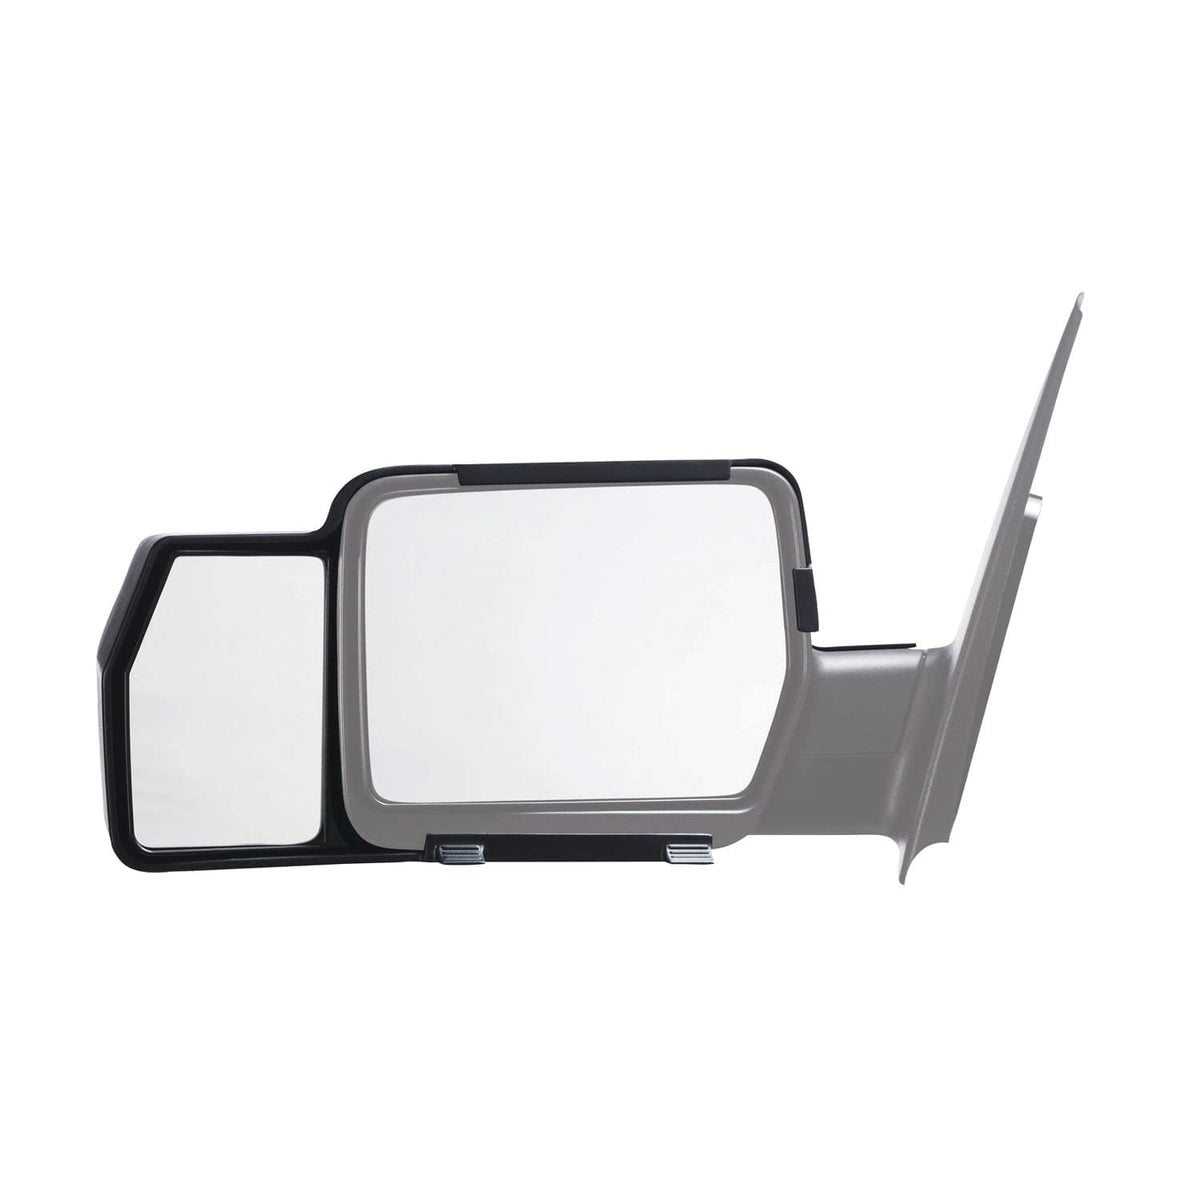 K-Source Qualifies for Free Shipping K-Source Snap-On Towing Mirrors fits Ford F-150 Lincoln Navigator 04-08 #81800